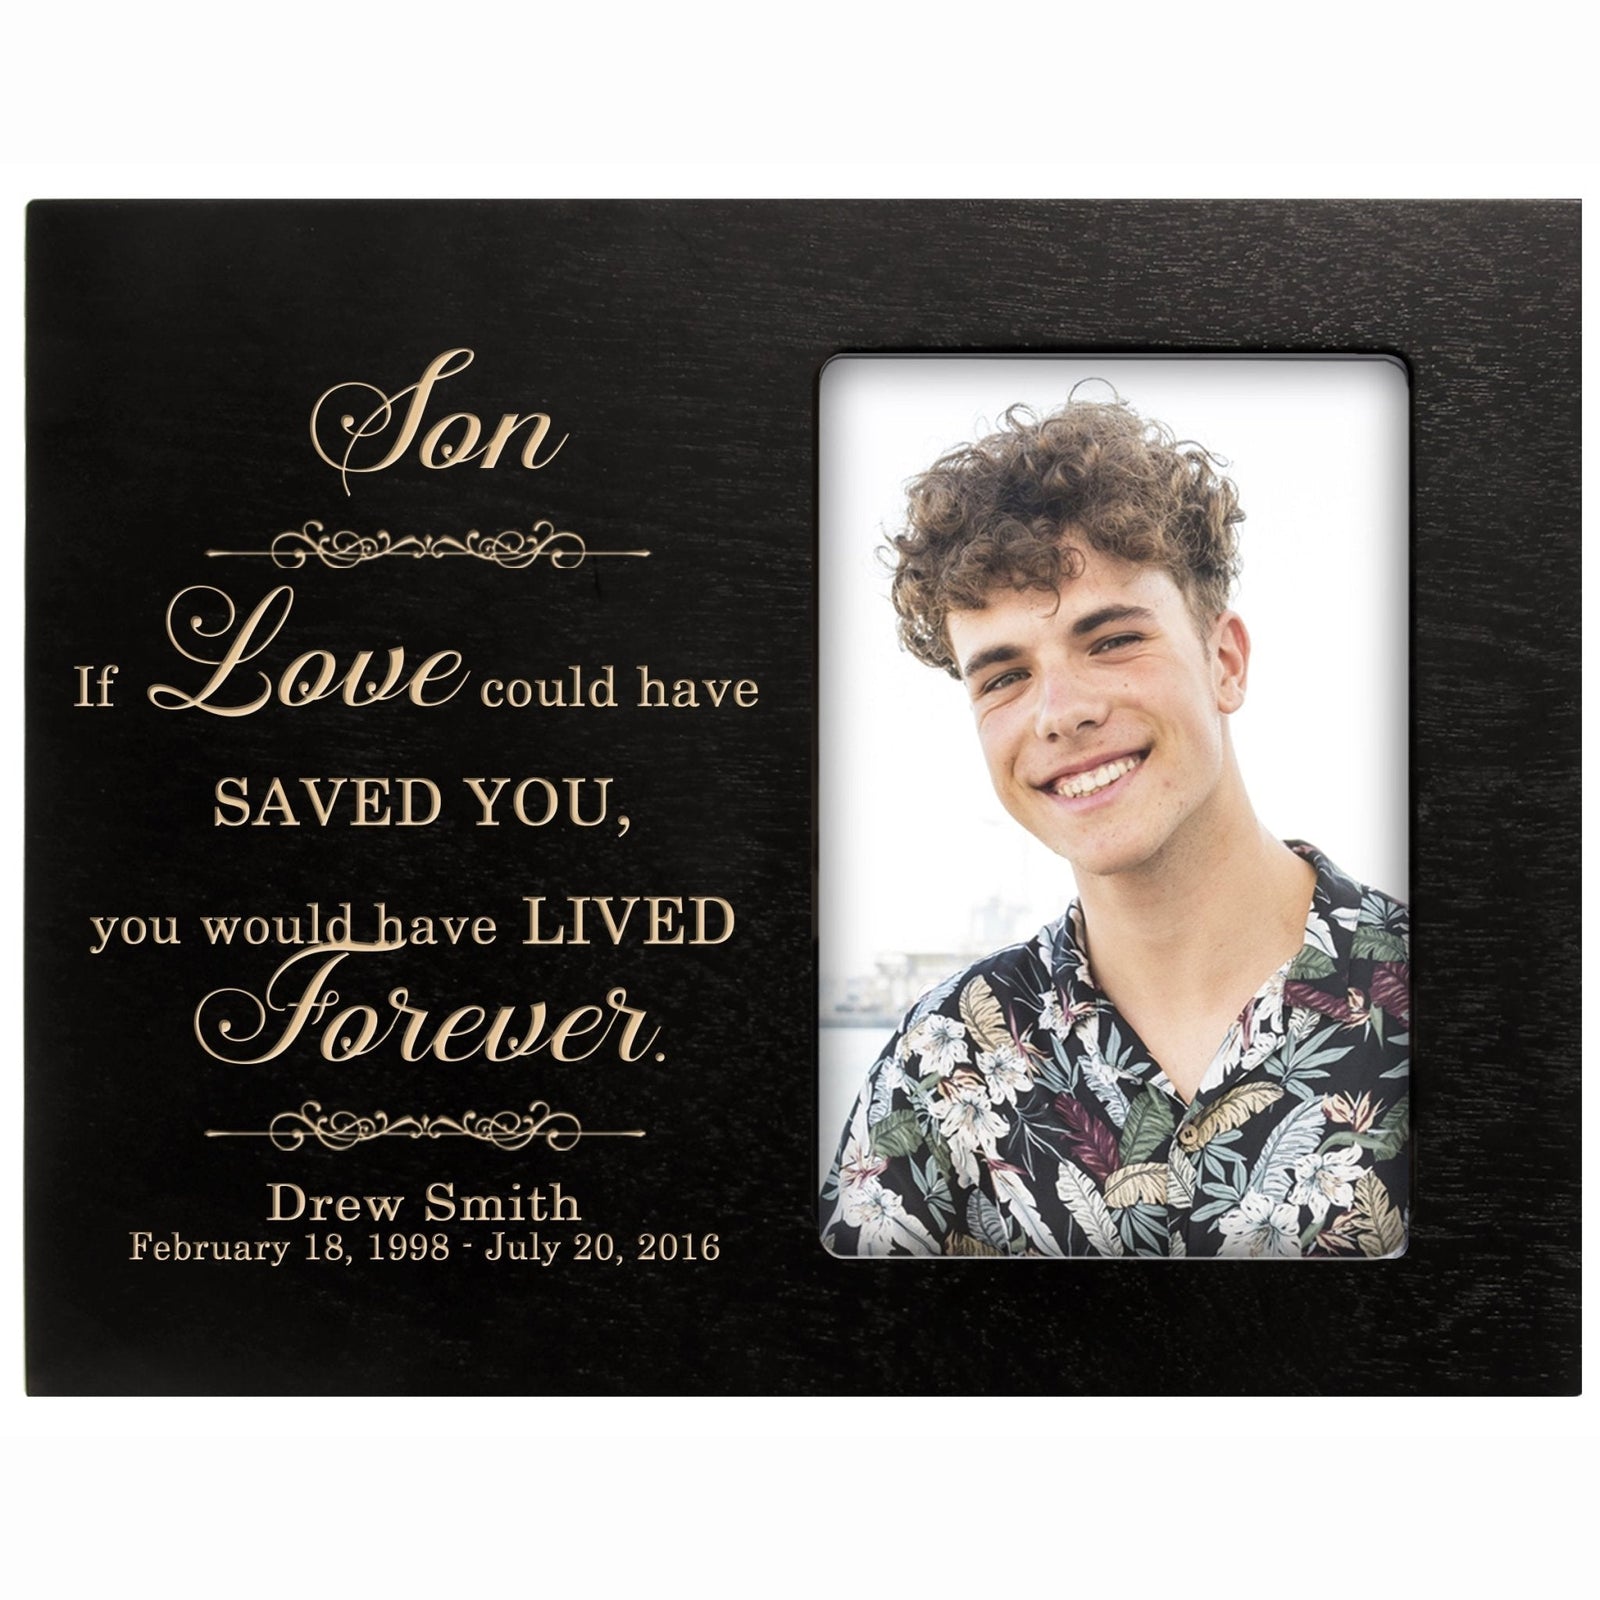 Personalized Horizontal 8x10 Wooden Memorial Picture Frame Holds 4x6 Photo - Son, If Love Could - LifeSong Milestones